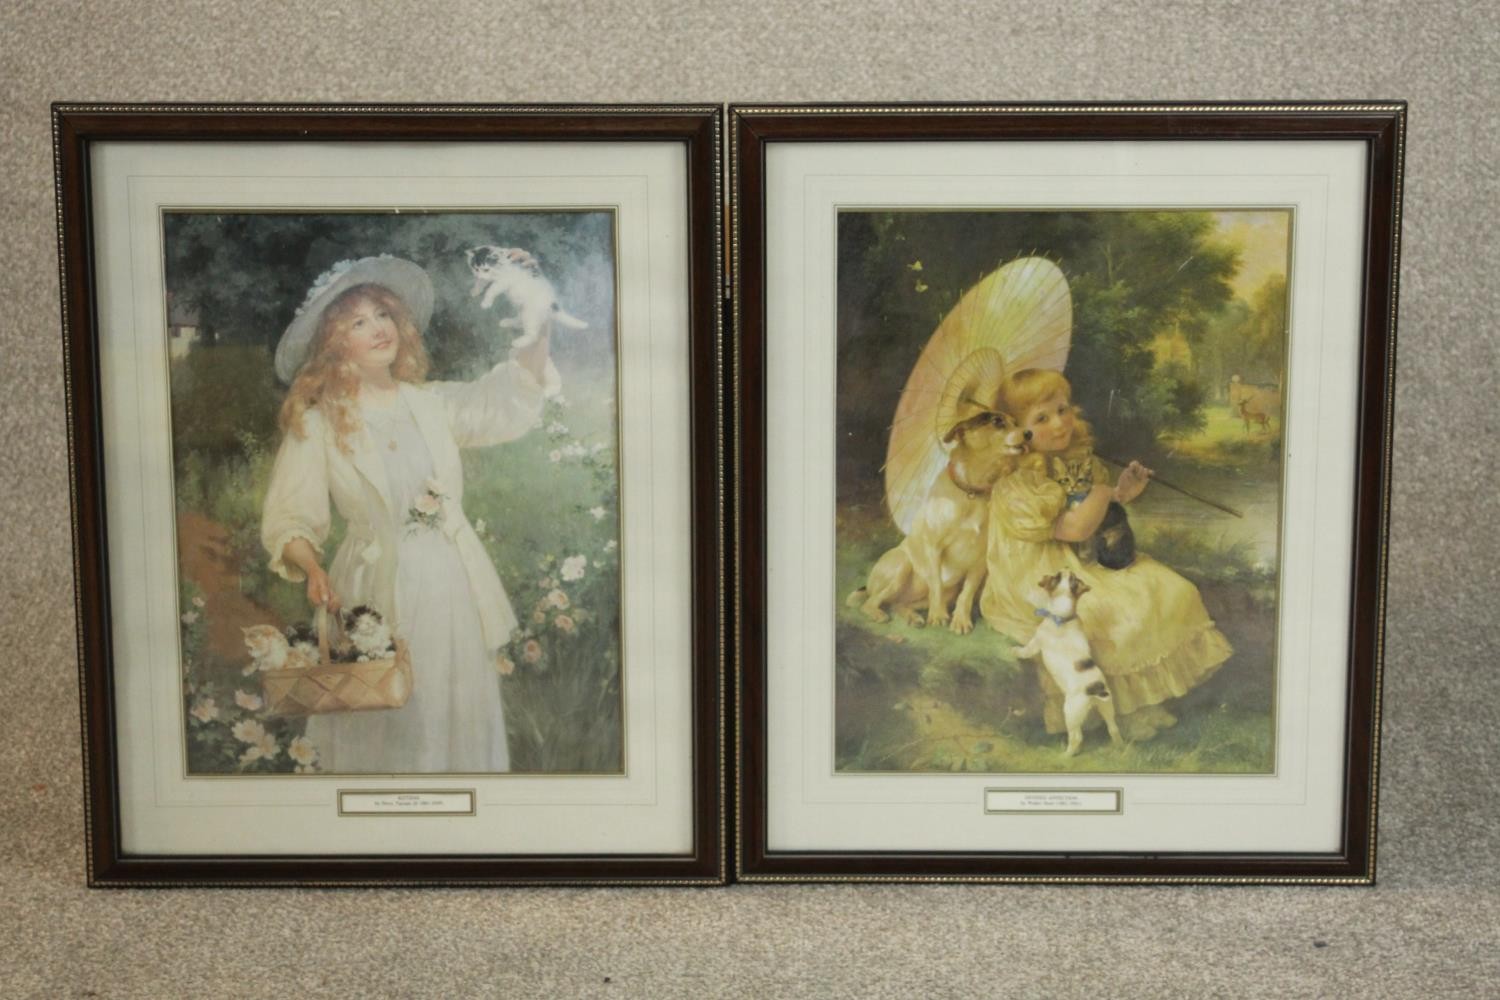 After Percy Tarrant, a framed and glazed vintage prints of a girl with a basket of kittens and